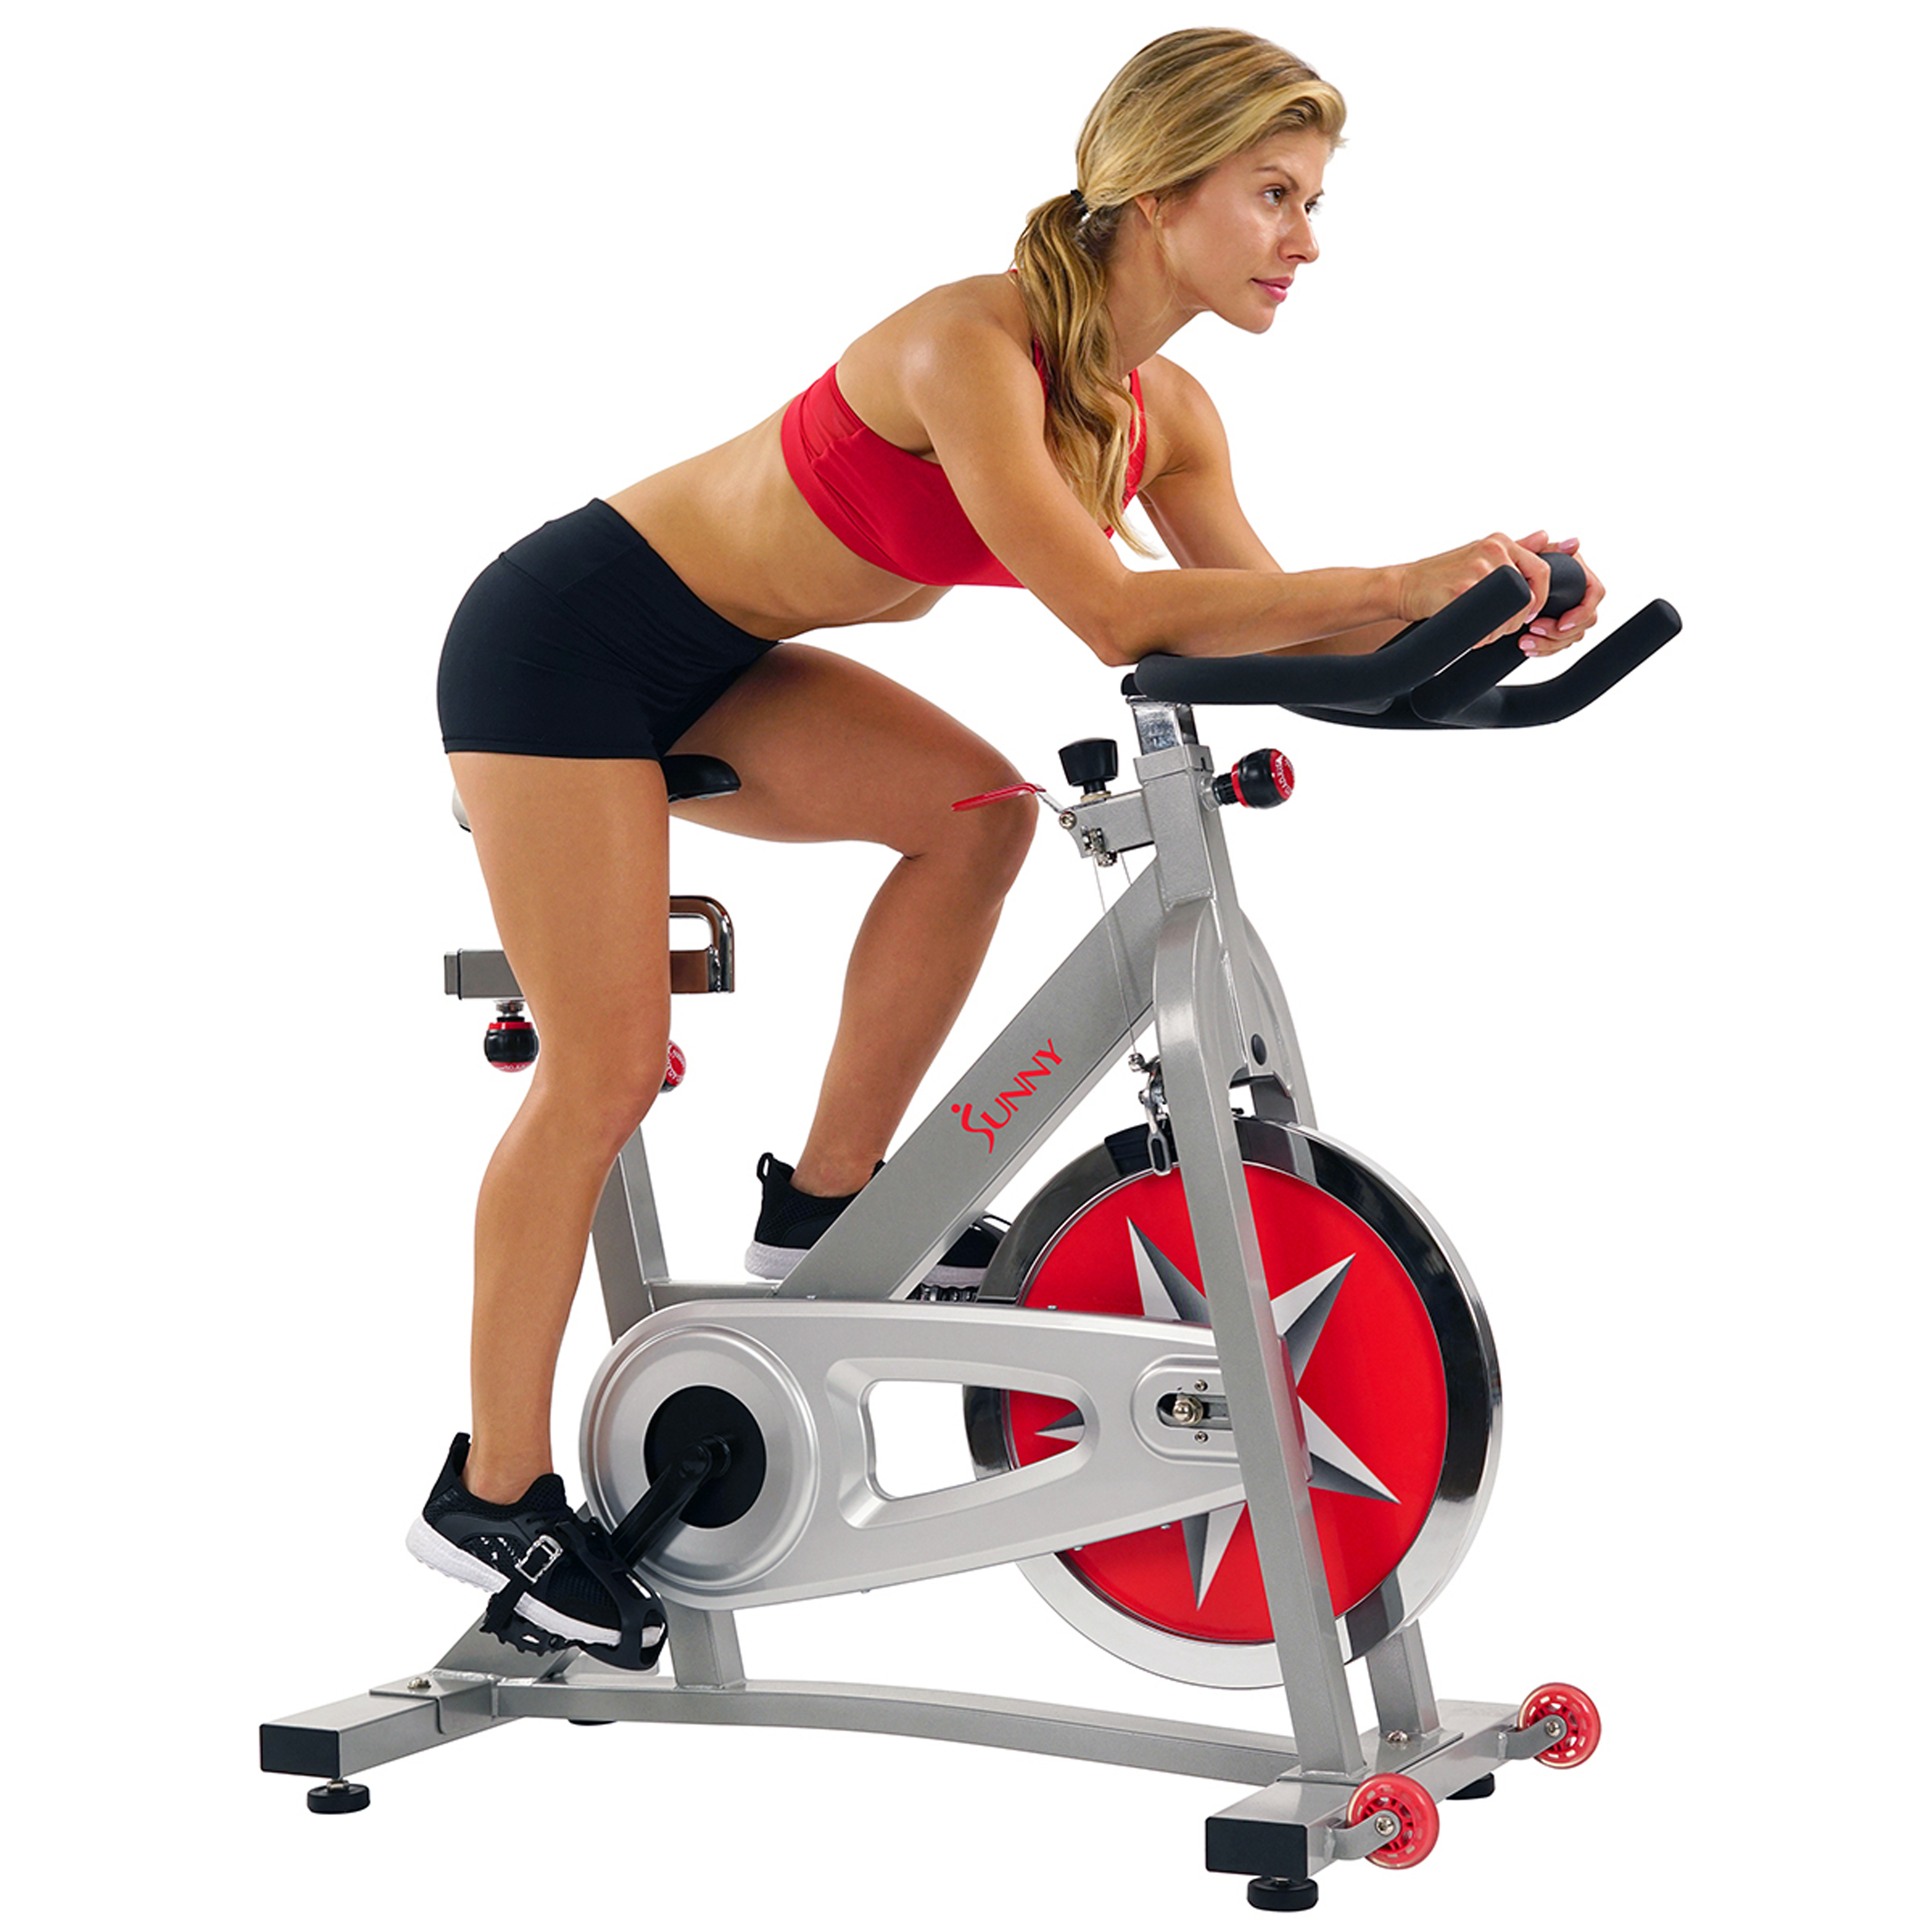 Sunny Health & Fitness Stationary Chain Drive 40 lb Flywheel Pro Indoor Cycling Exercise Bike Trainer, Workout Machine, SF-B901 - image 1 of 9